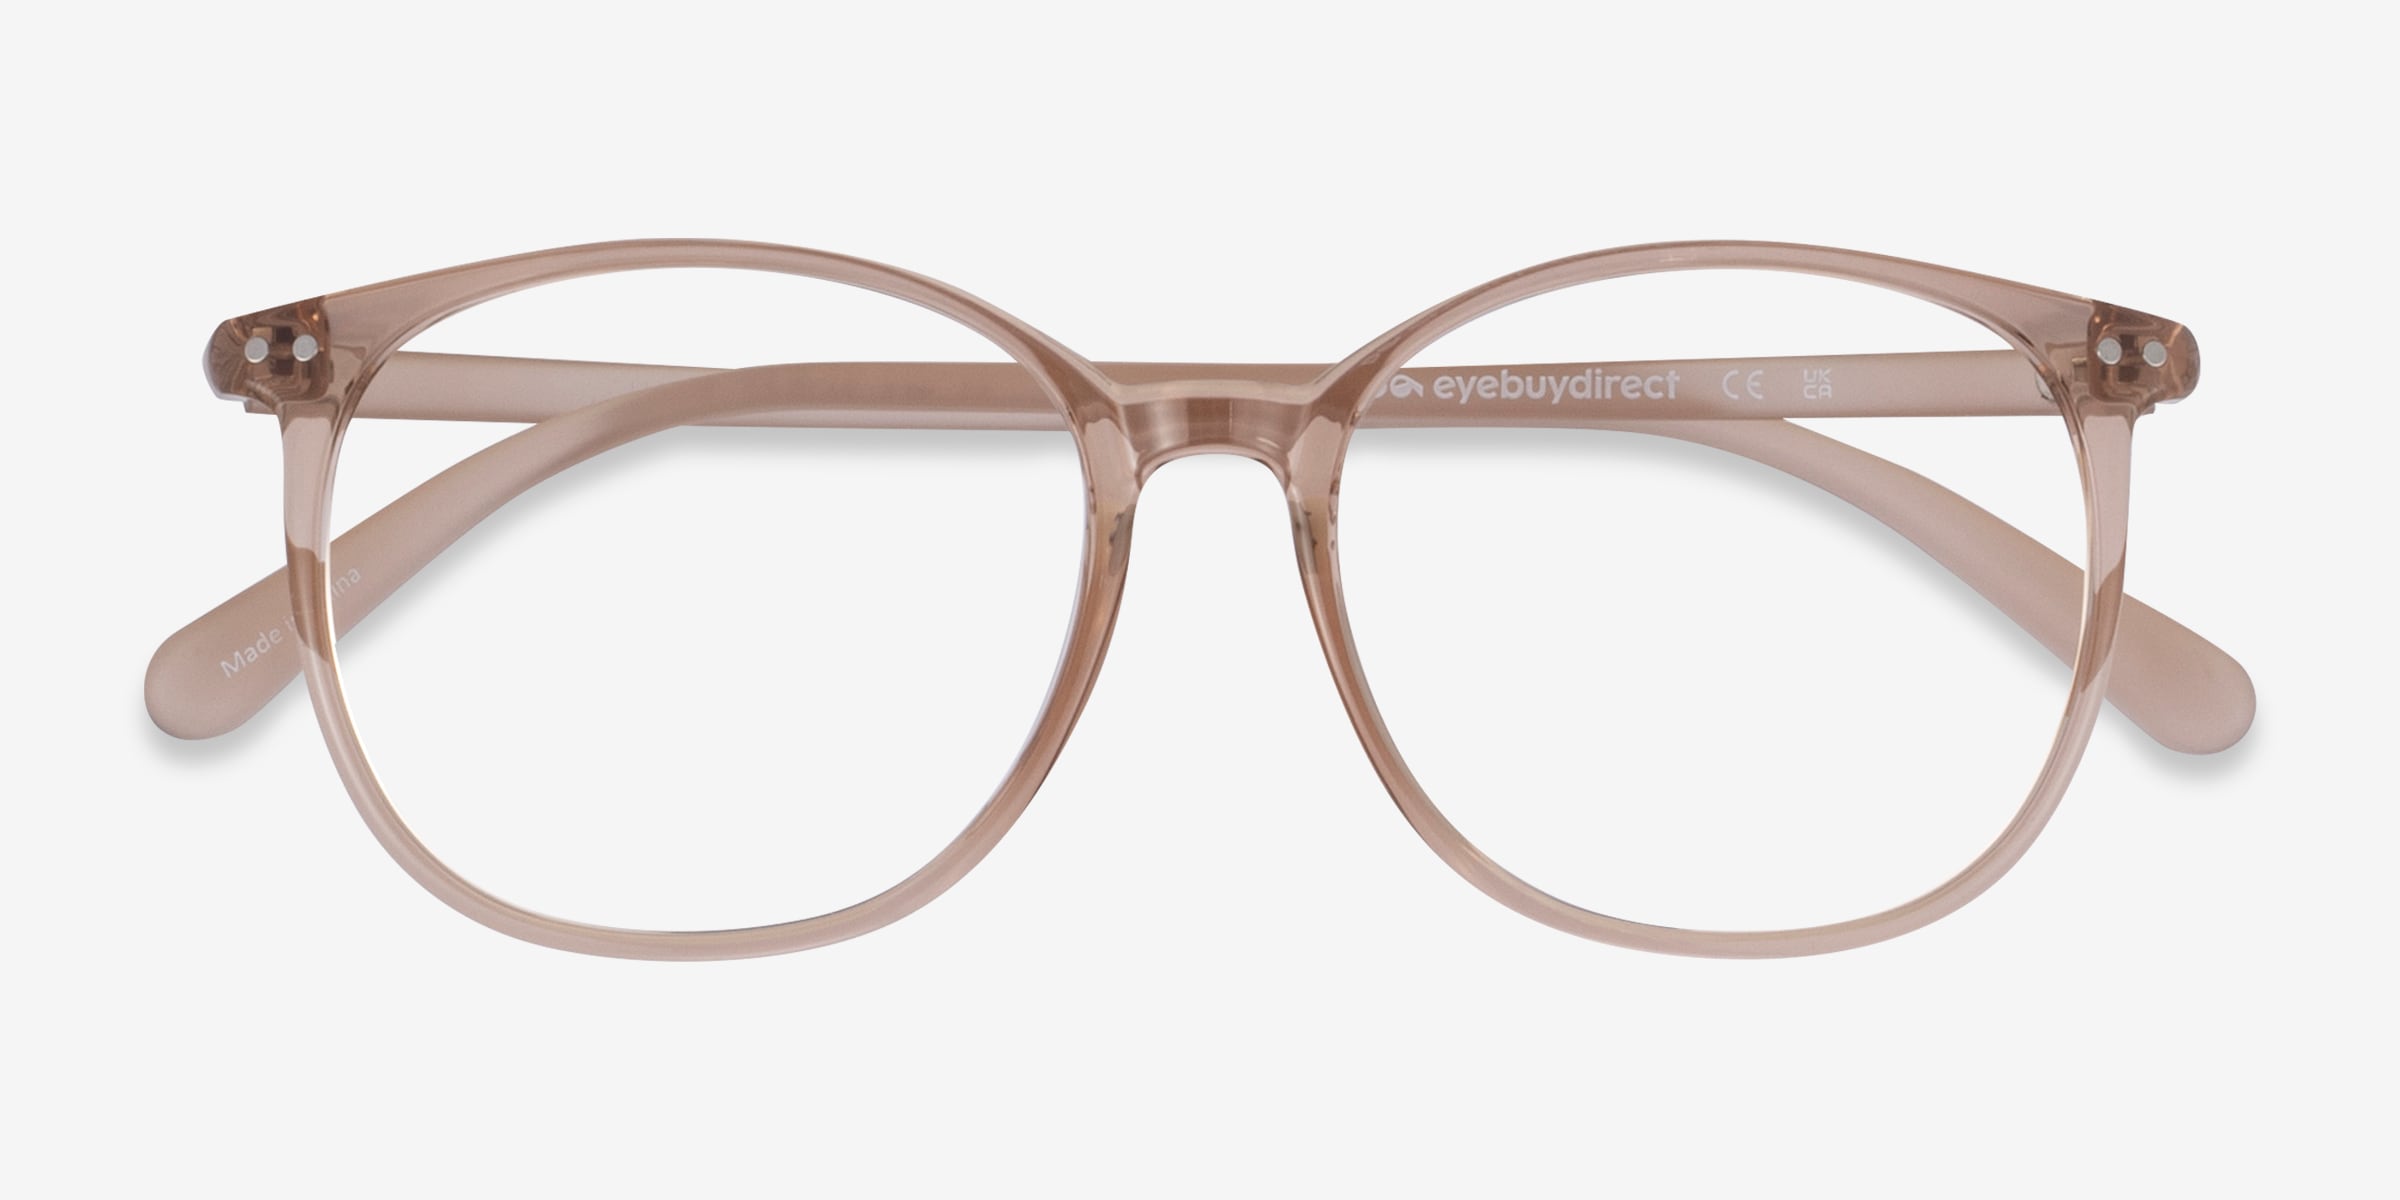 Retro Glasses, Old-School Styles From The 70s & 80s | Eyebuydirect